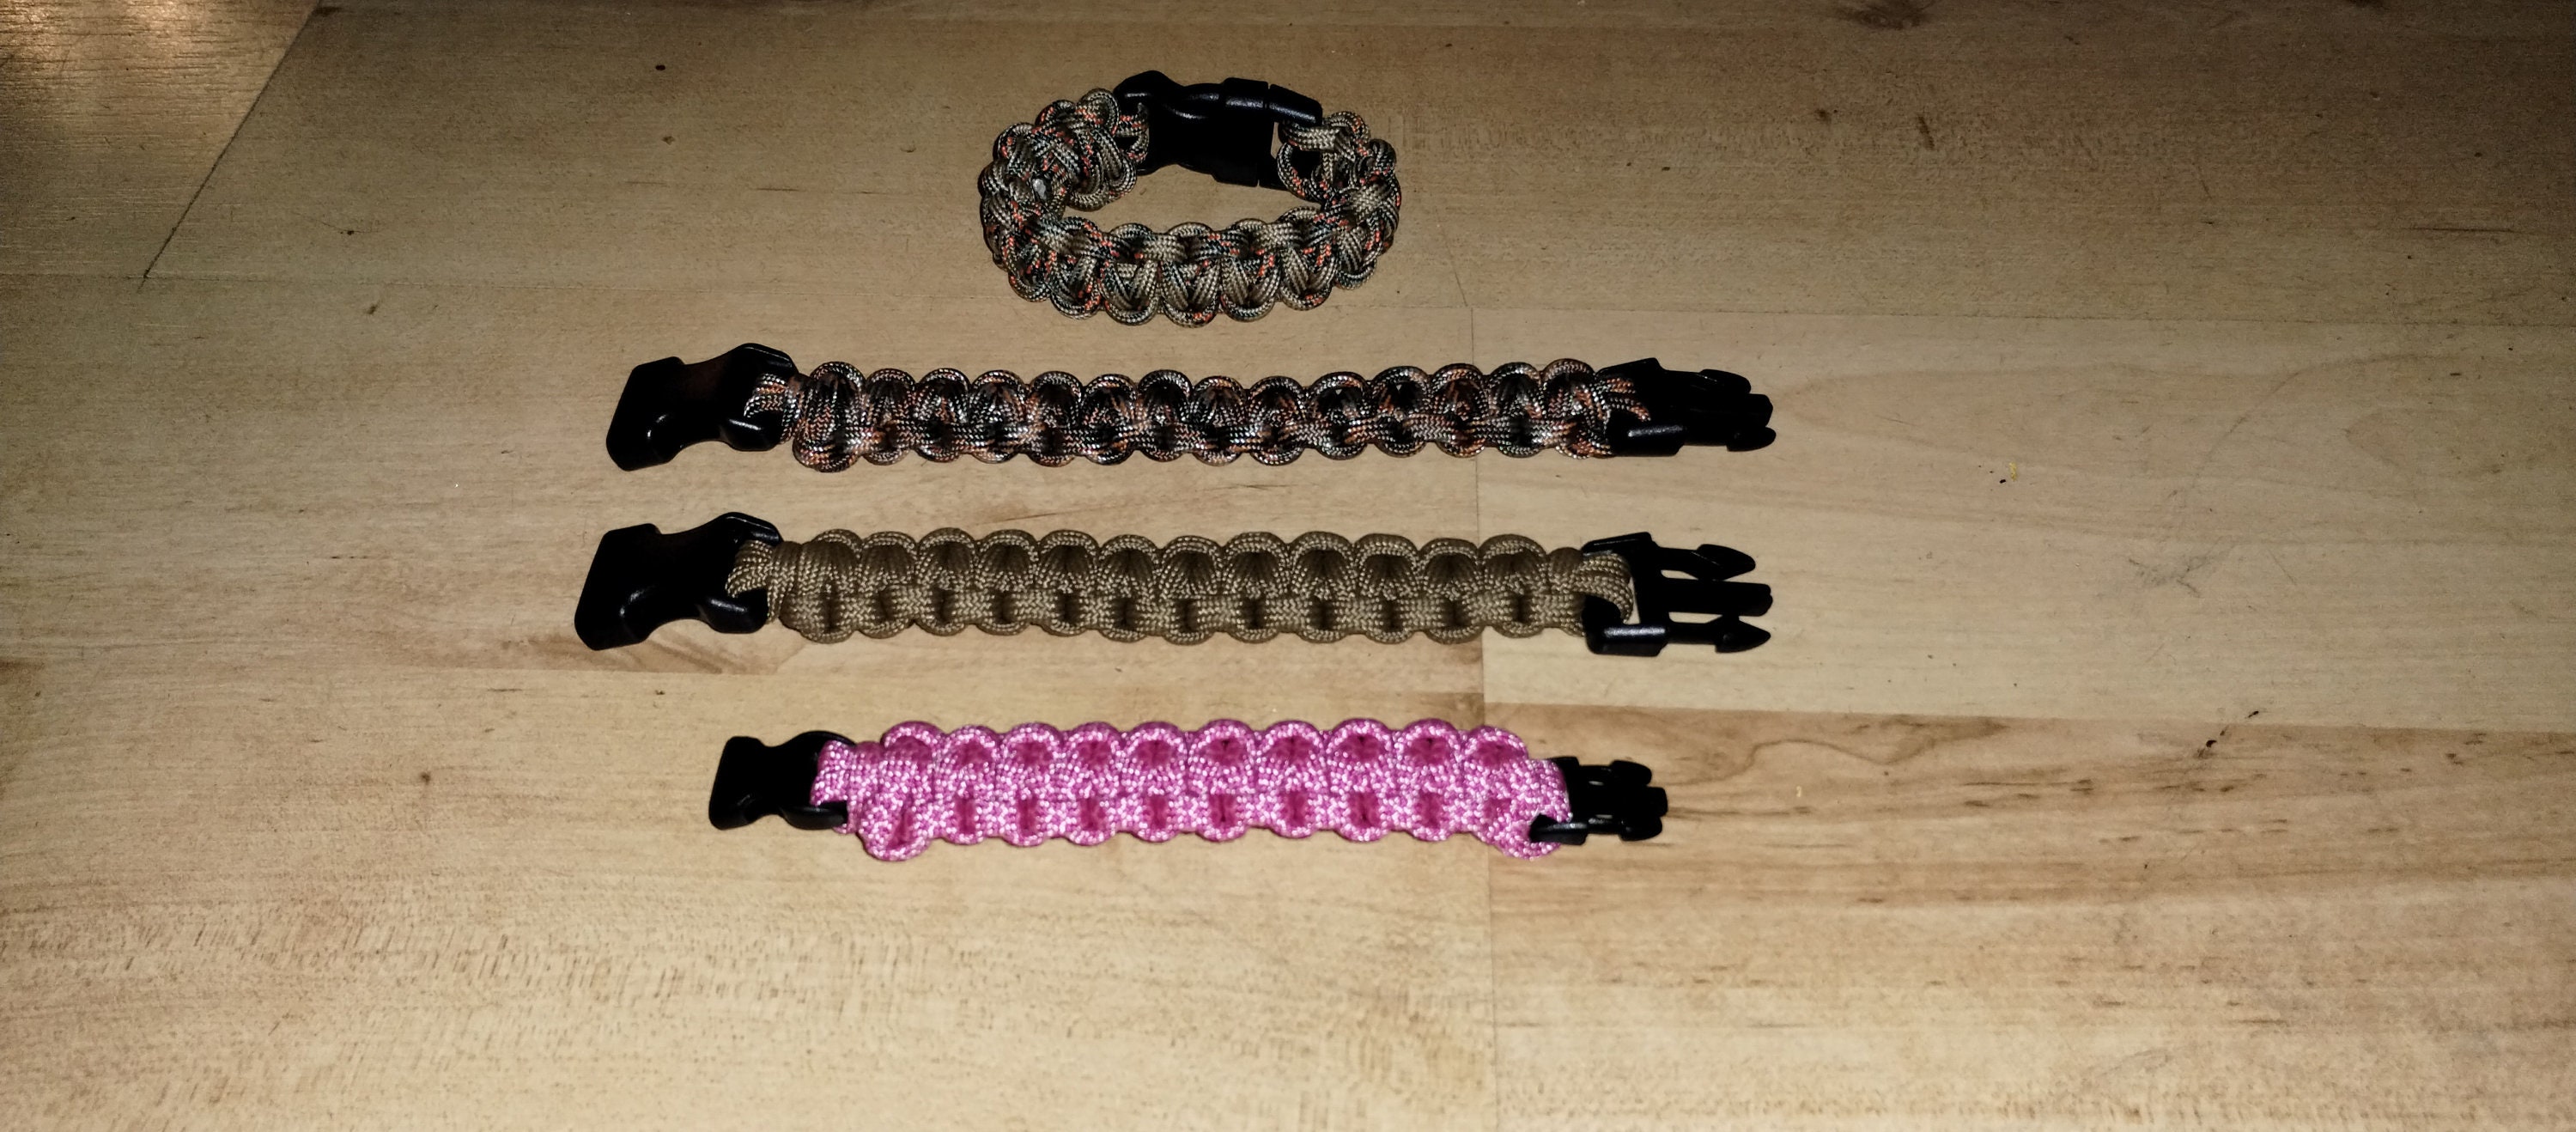 550 Paracord - Instructables